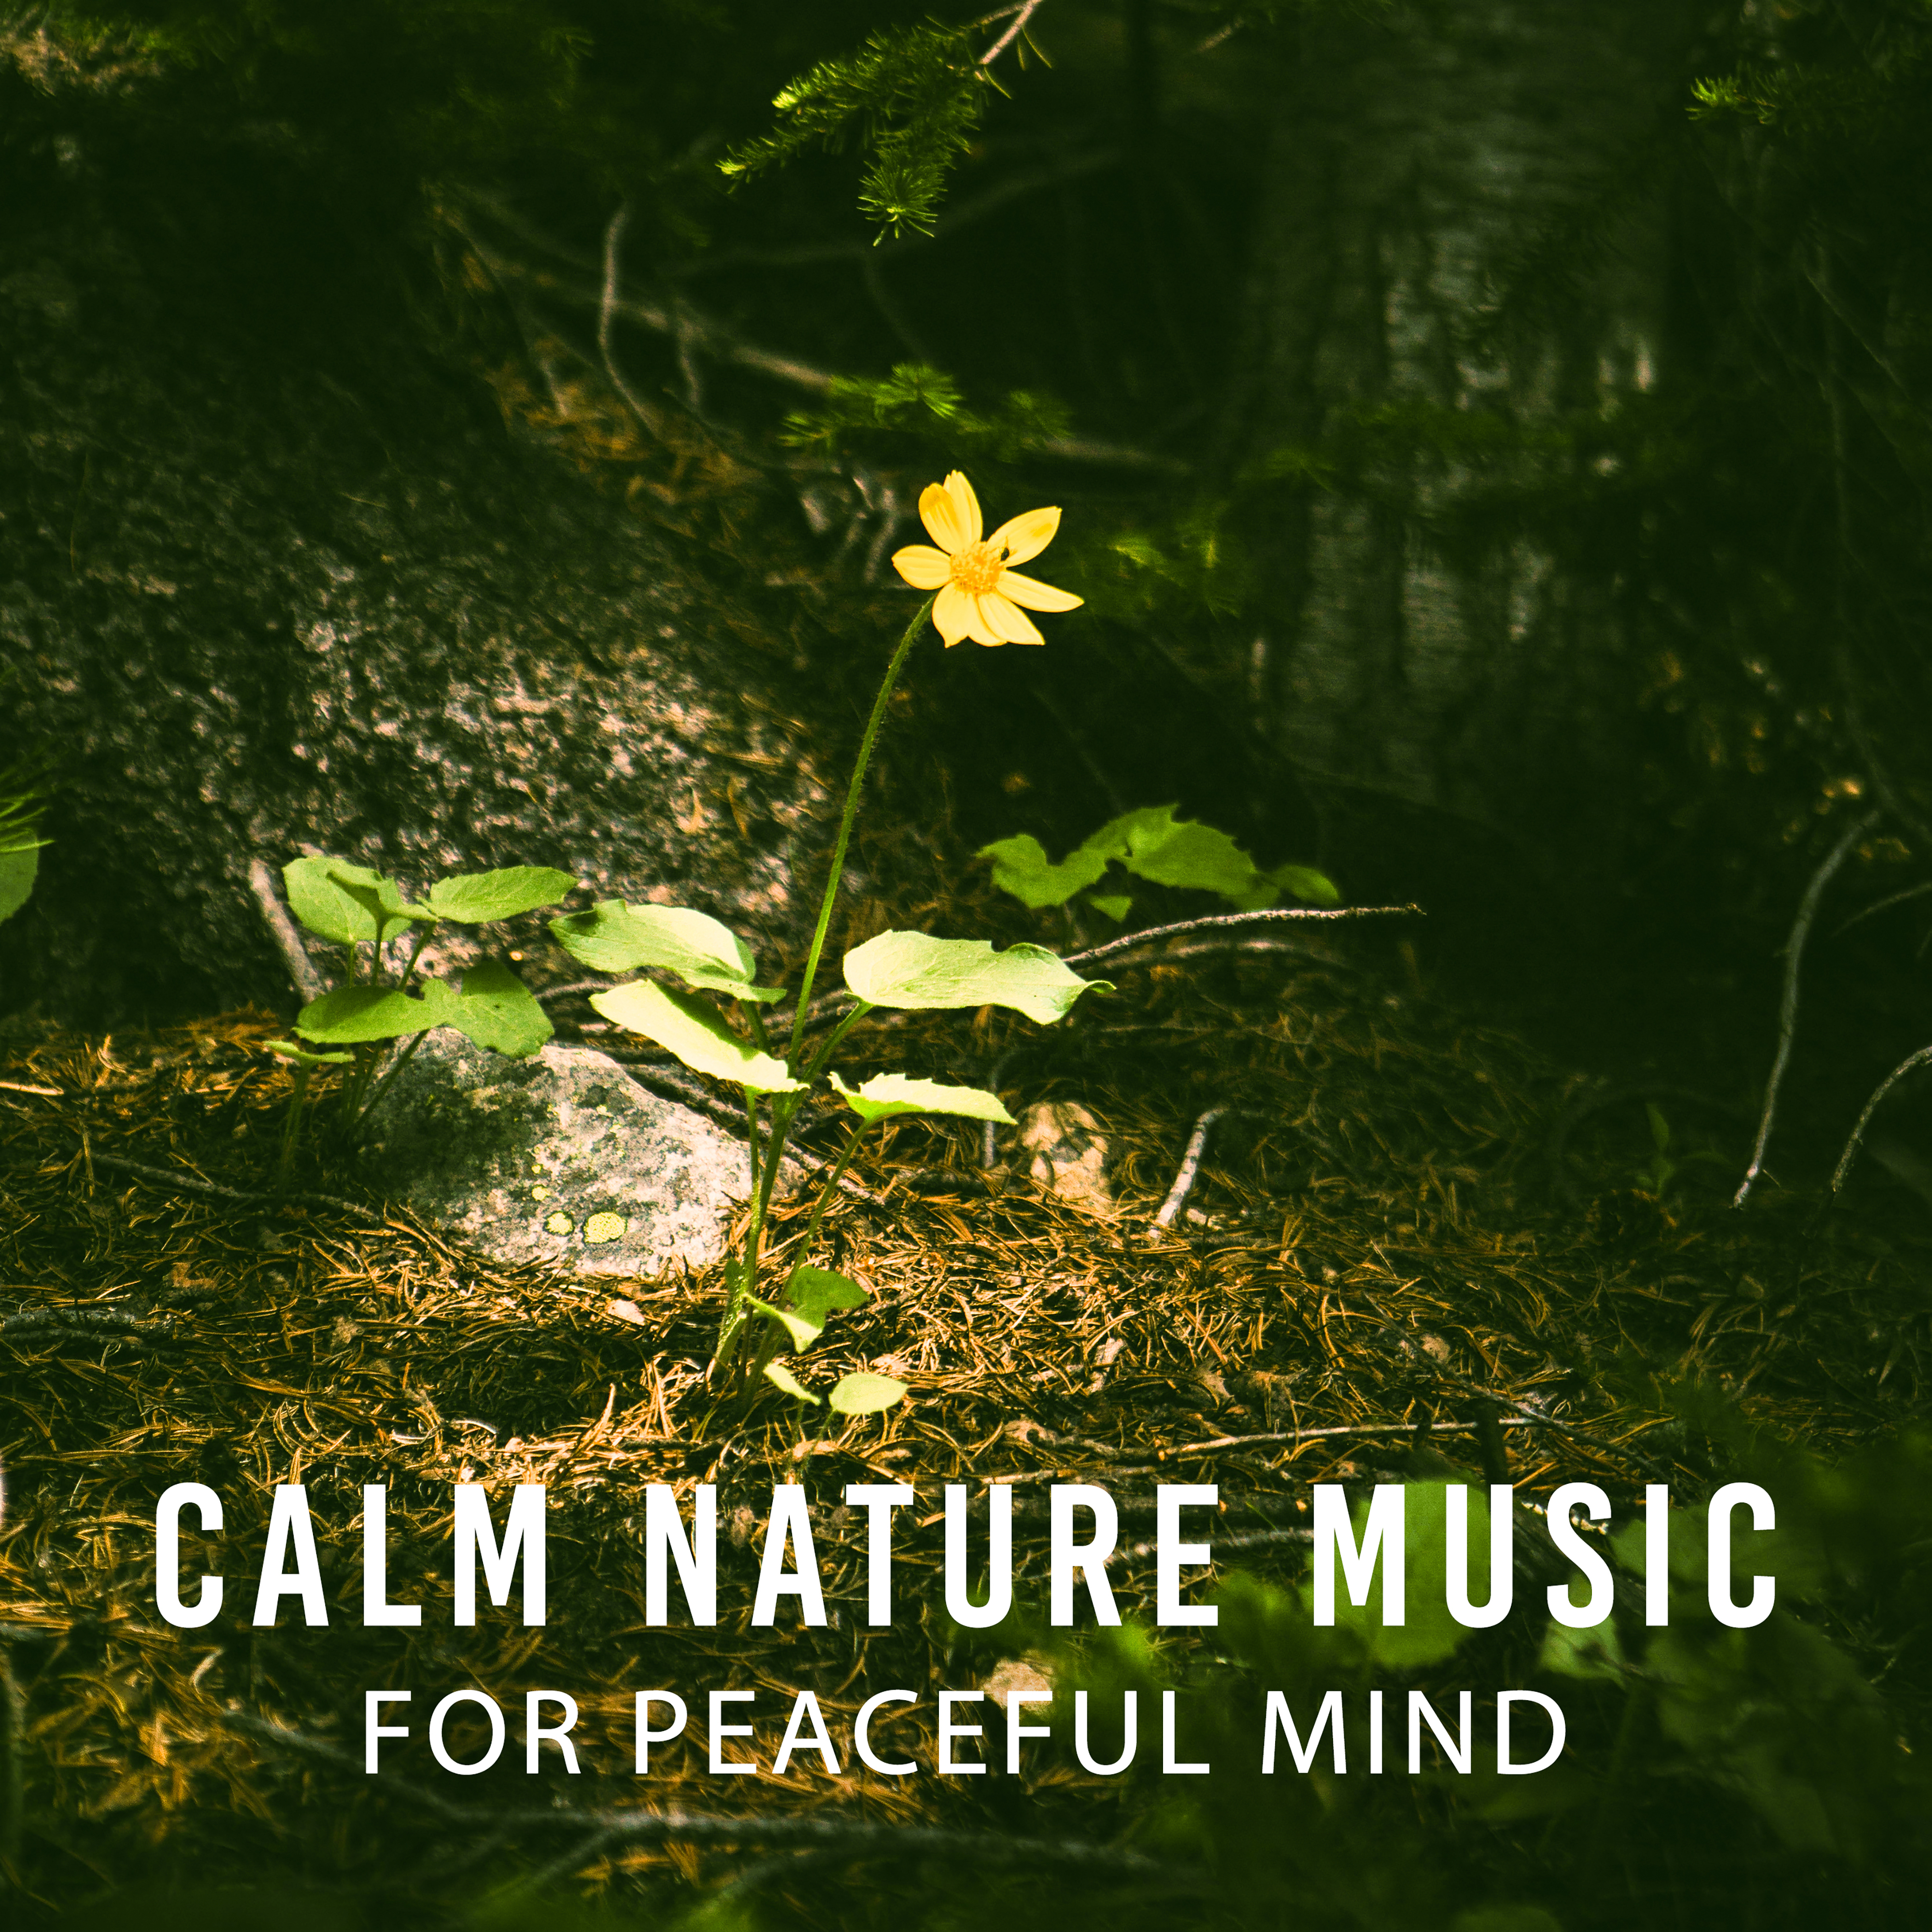 Calm Nature Music for Peaceful Mind  Rest with Nature Sounds, Music to Relax, Inner Harmony, Spirit Journey